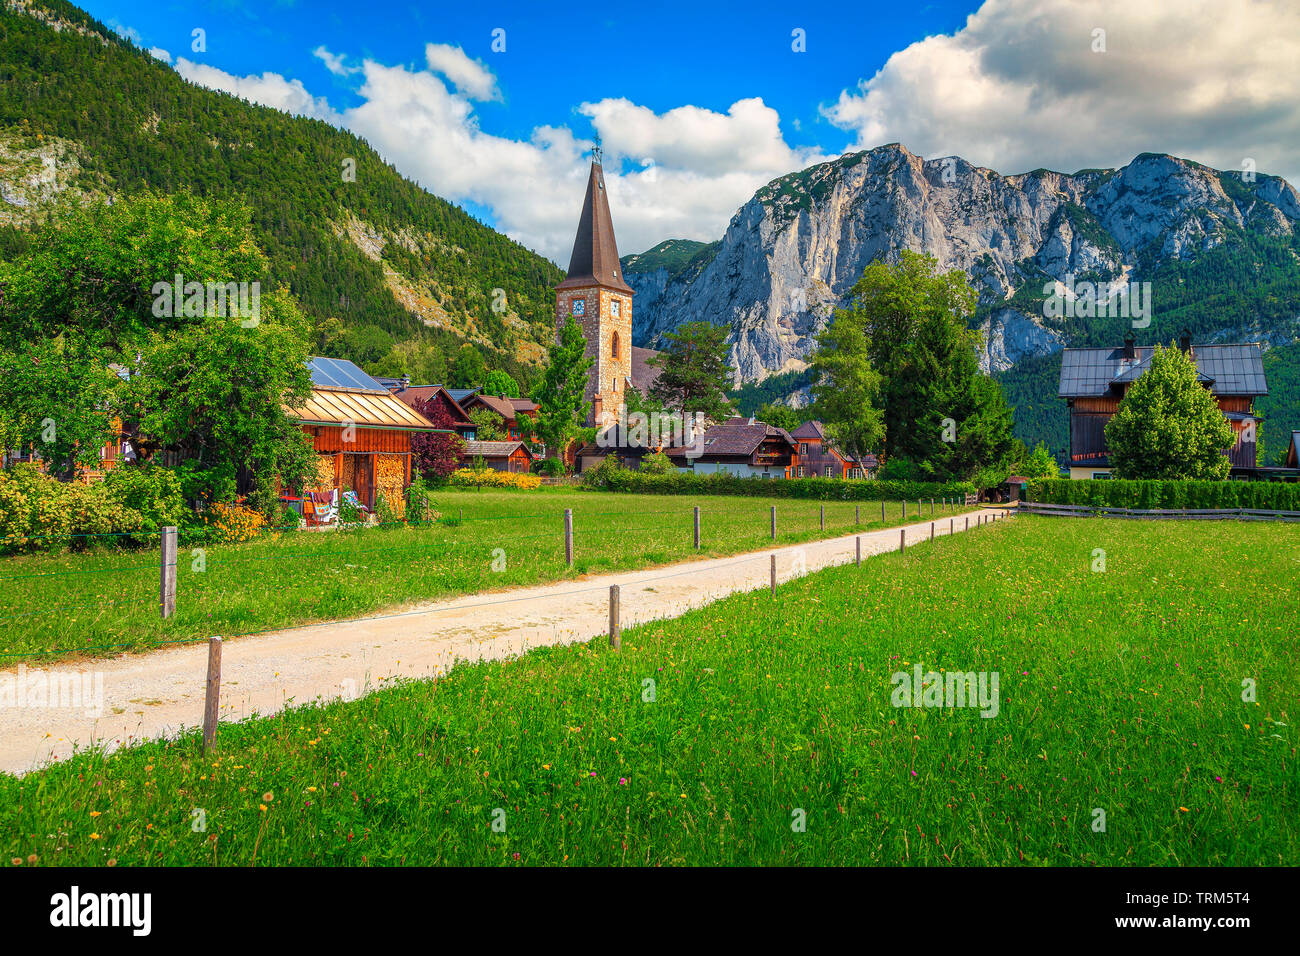 Spectacular summer vacation resort, alpine village with old church and high mountains, Lake Altaussee, Salzkammergut, Austria, Europe Stock Photo